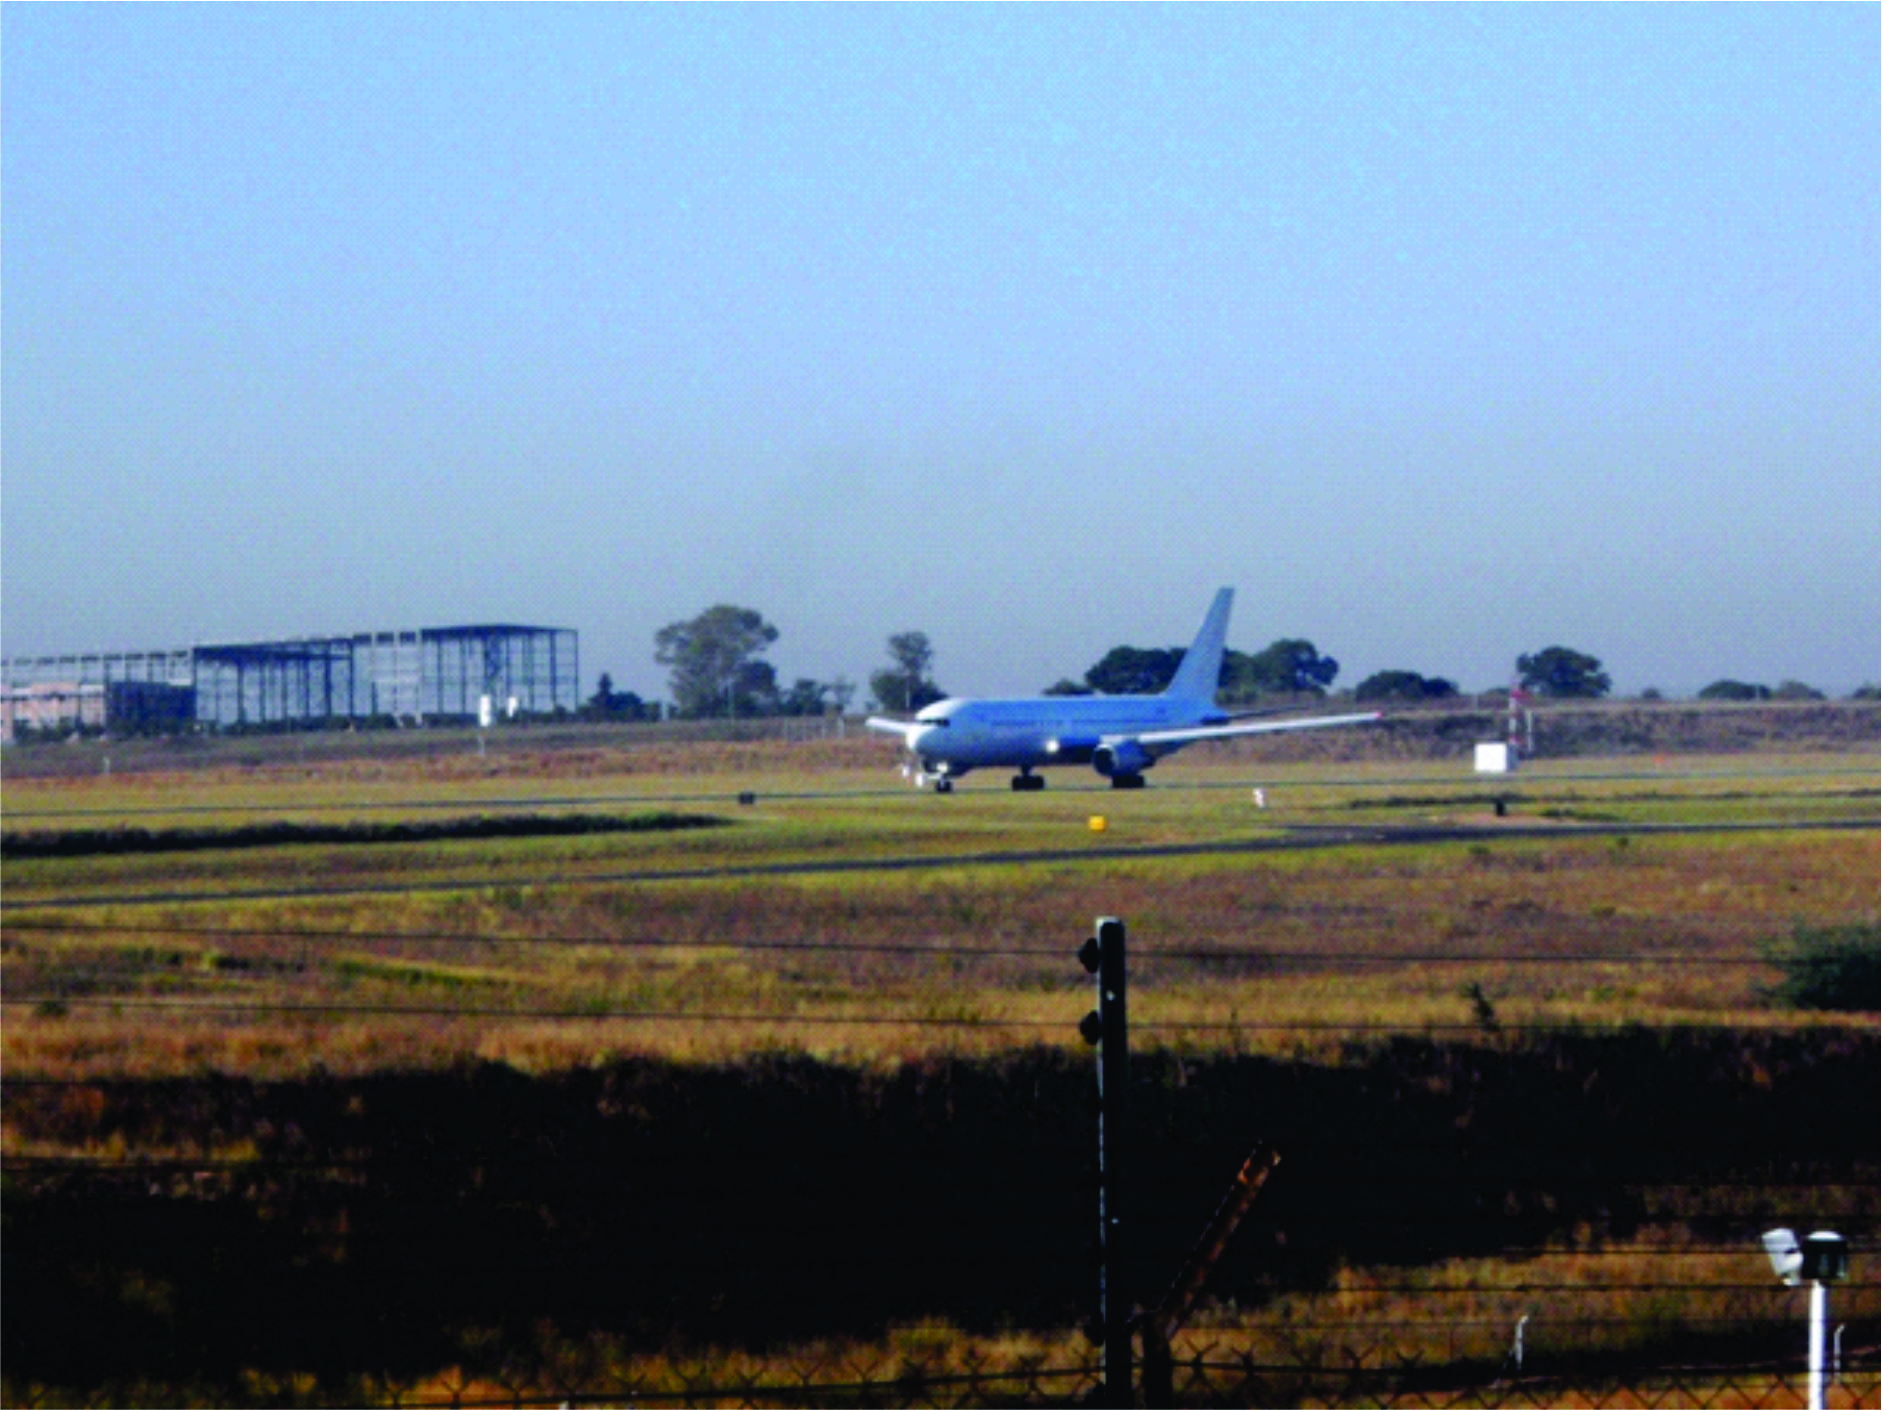 The humanitarian flight sponsored by government taxis down the runway at the Lanseria Airport, Johannesburg.